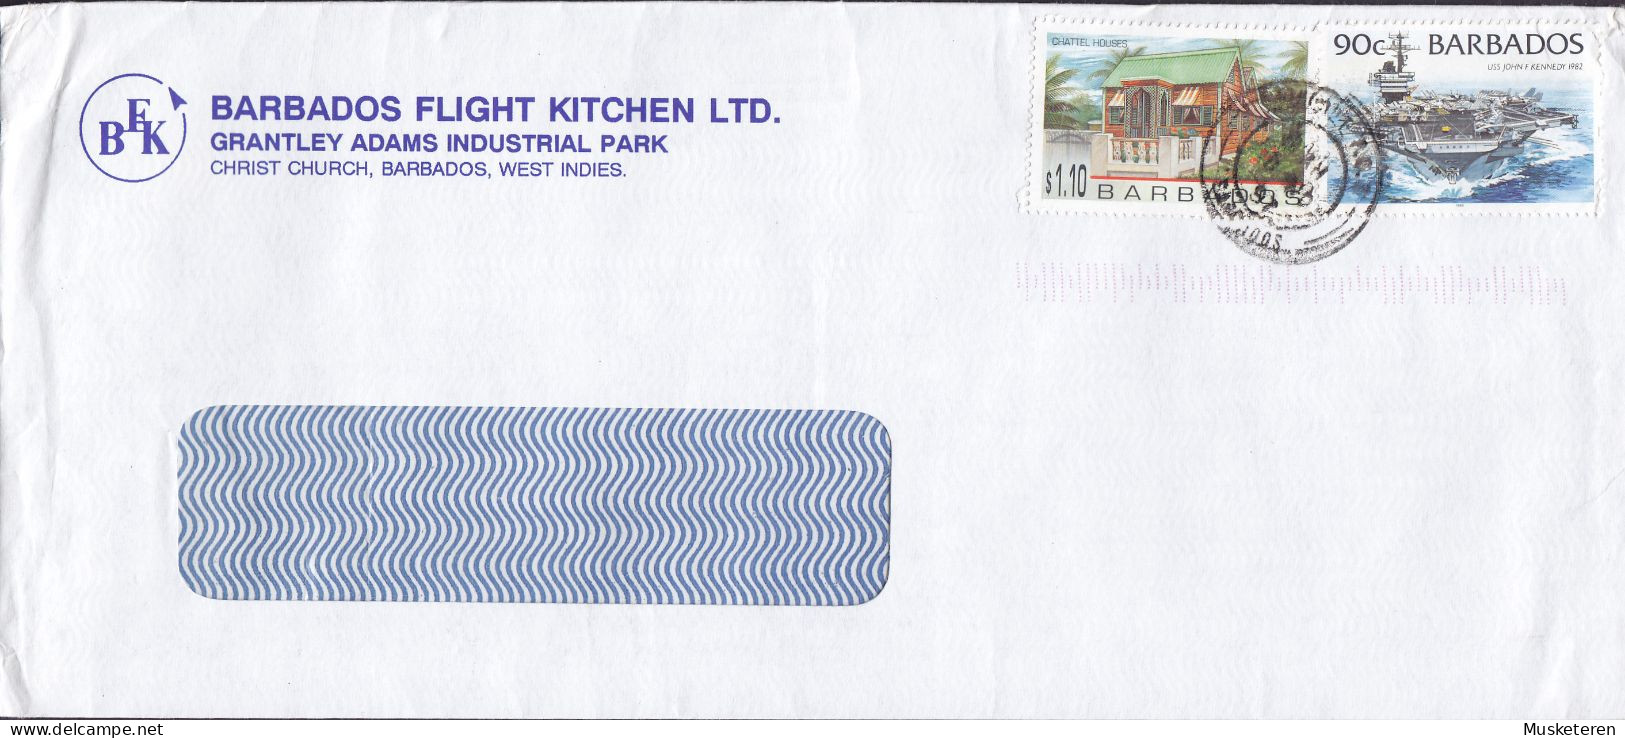 Barbados BARBADOS FLIGHT KITCHEN, AIRPORT P. O. E. 3, 1997 Cover Brief $1.10 Chattel House & 90c. USS John F. Kennedy - Barbades (1966-...)